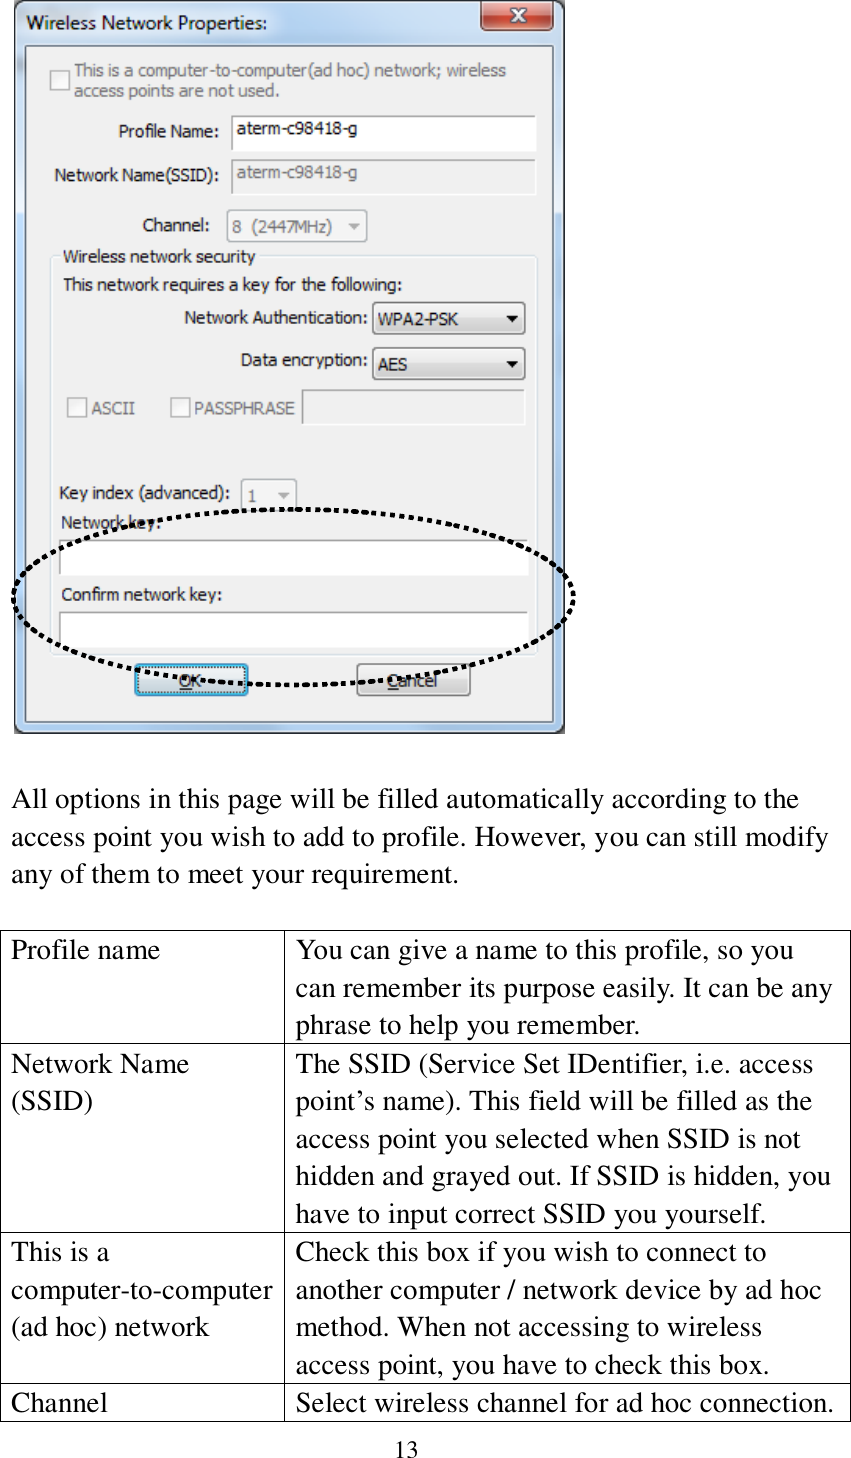 13    All options in this page will be filled automatically according to the access point you wish to add to profile. However, you can still modify any of them to meet your requirement.  Profile name You can give a name to this profile, so you can remember its purpose easily. It can be any phrase to help you remember. Network Name (SSID) The SSID (Service Set IDentifier, i.e. access point’s name). This field will be filled as the access point you selected when SSID is not hidden and grayed out. If SSID is hidden, you have to input correct SSID you yourself. This is a computer-to-computer (ad hoc) network Check this box if you wish to connect to another computer / network device by ad hoc method. When not accessing to wireless access point, you have to check this box. Channel Select wireless channel for ad hoc connection. 